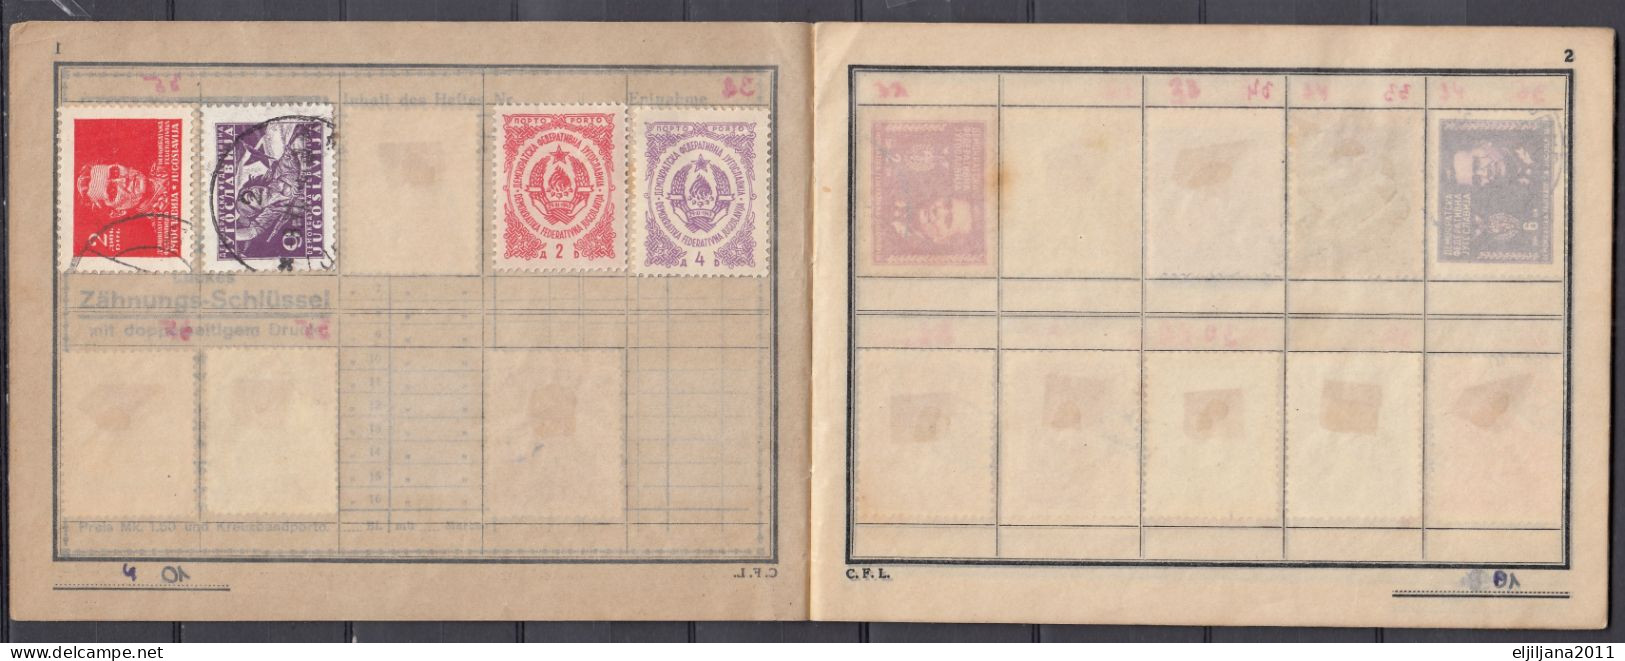 ⁕ Yugoslavia ⁕ Old Album - Booklet With Stamps (9 Blank Sheets) 14.5 X 11 Cm ⁕ 74 Used Stamps - Tito / Partisans - Scan - Collezioni & Lotti